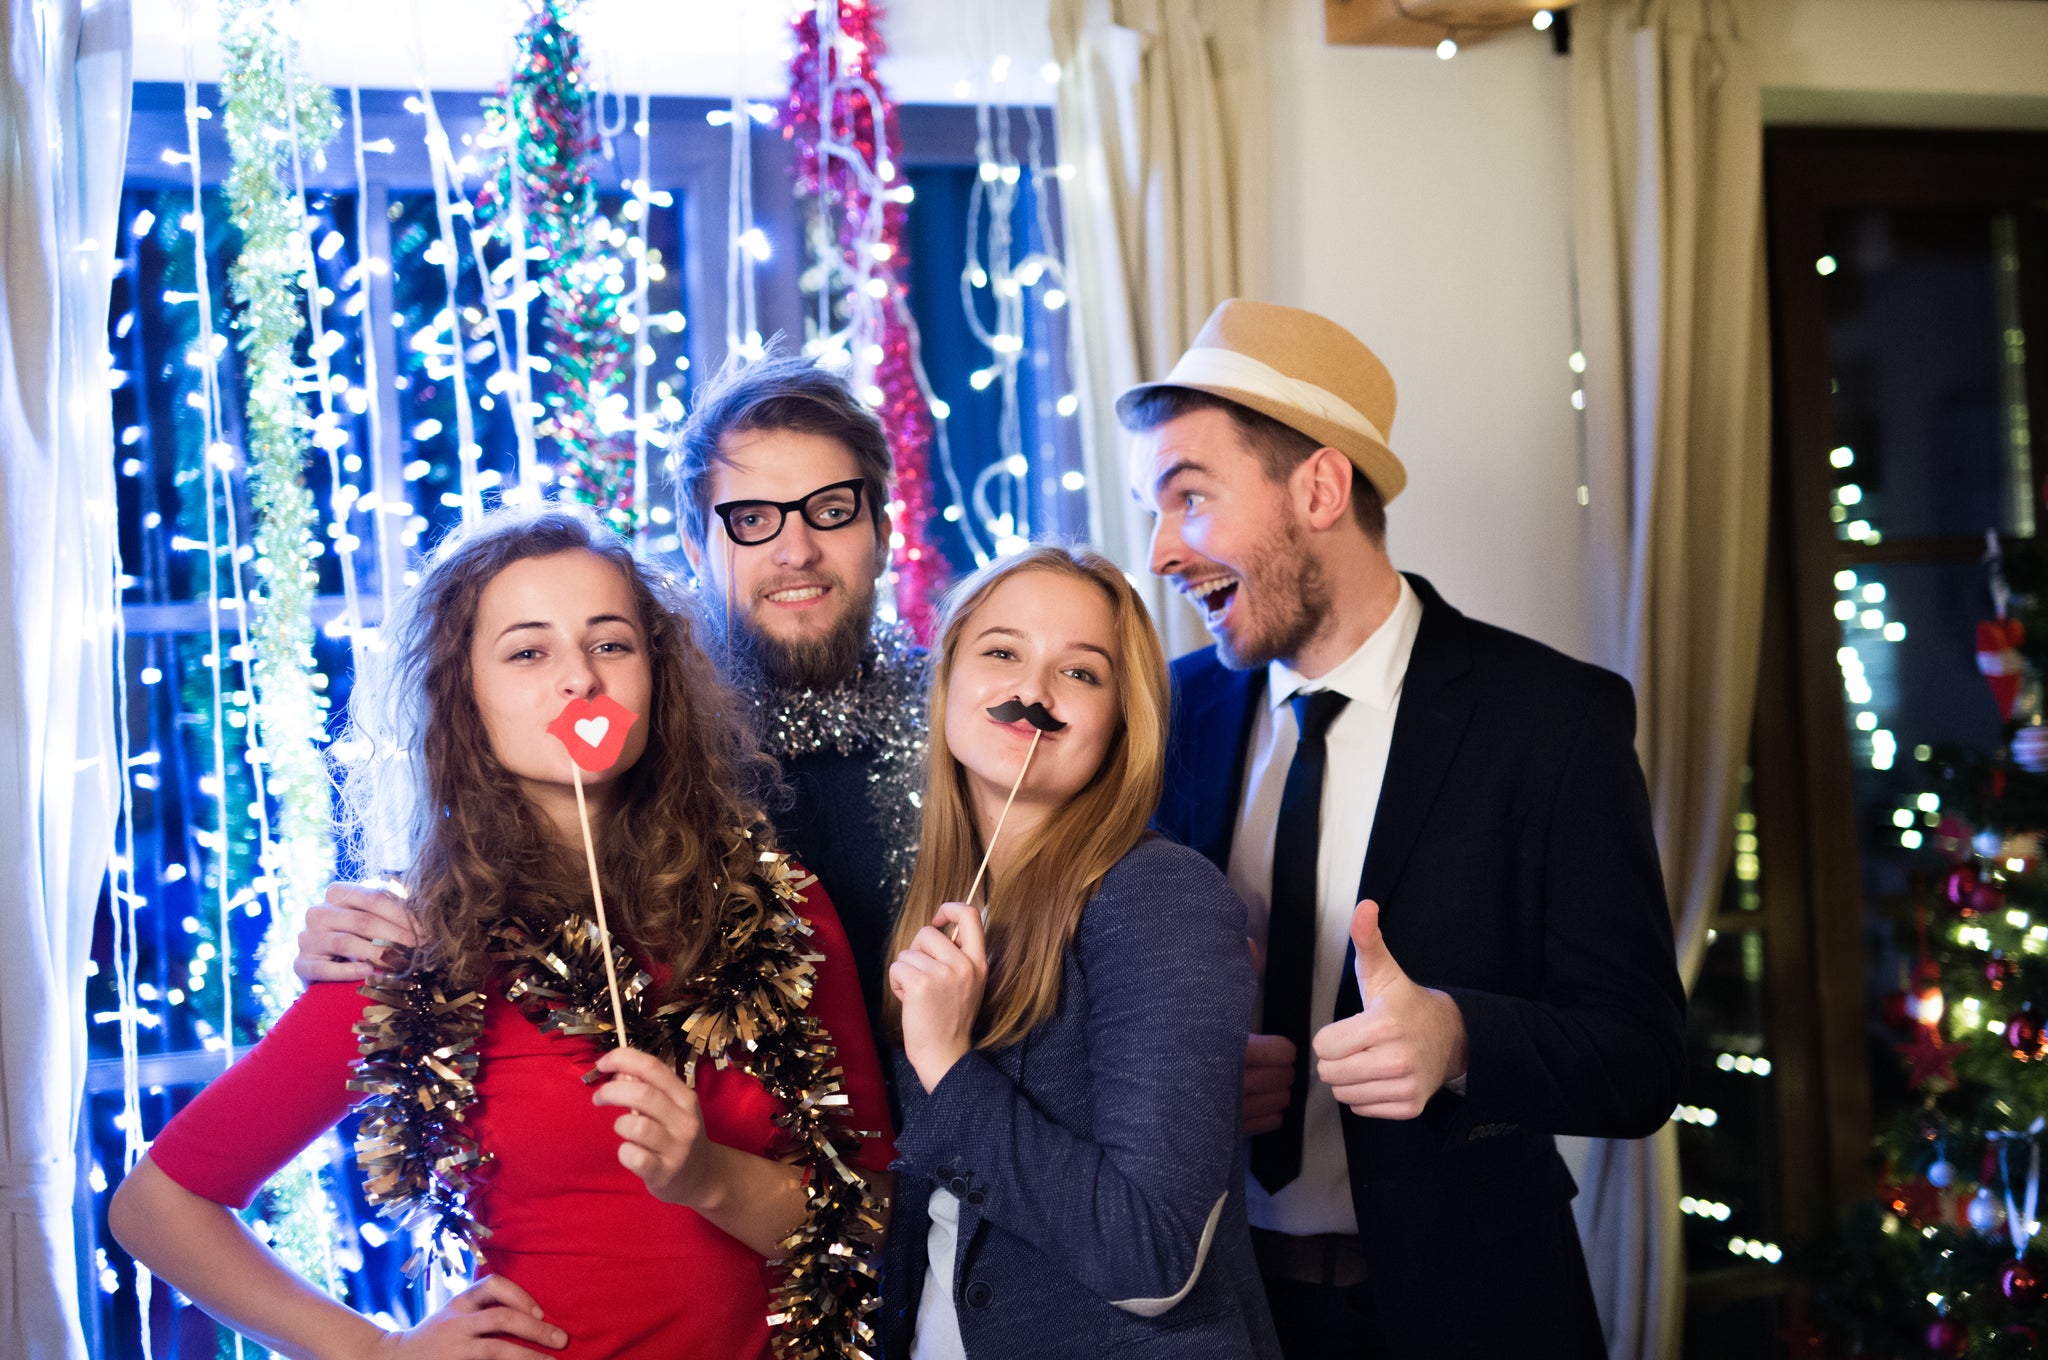 Need a Photo Booth Rental in Los Angeles? Check Out Snap Moments